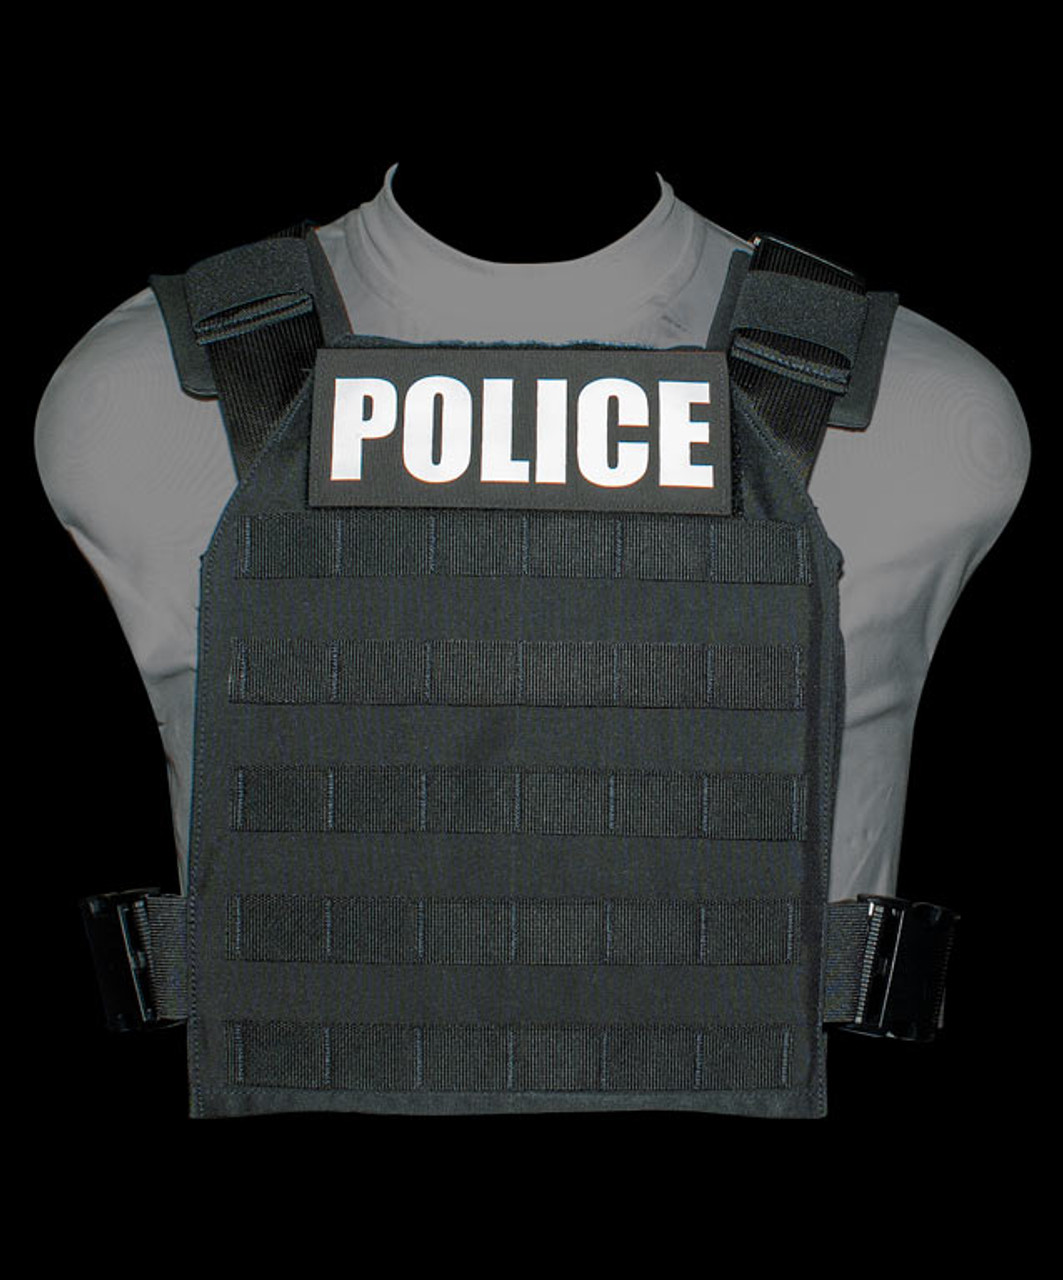 Point Blank Plate Rack Ballistic Body Armor Vest, For Military and Police, Available with NIJ .06 Level III and IV Hard Armor Plates